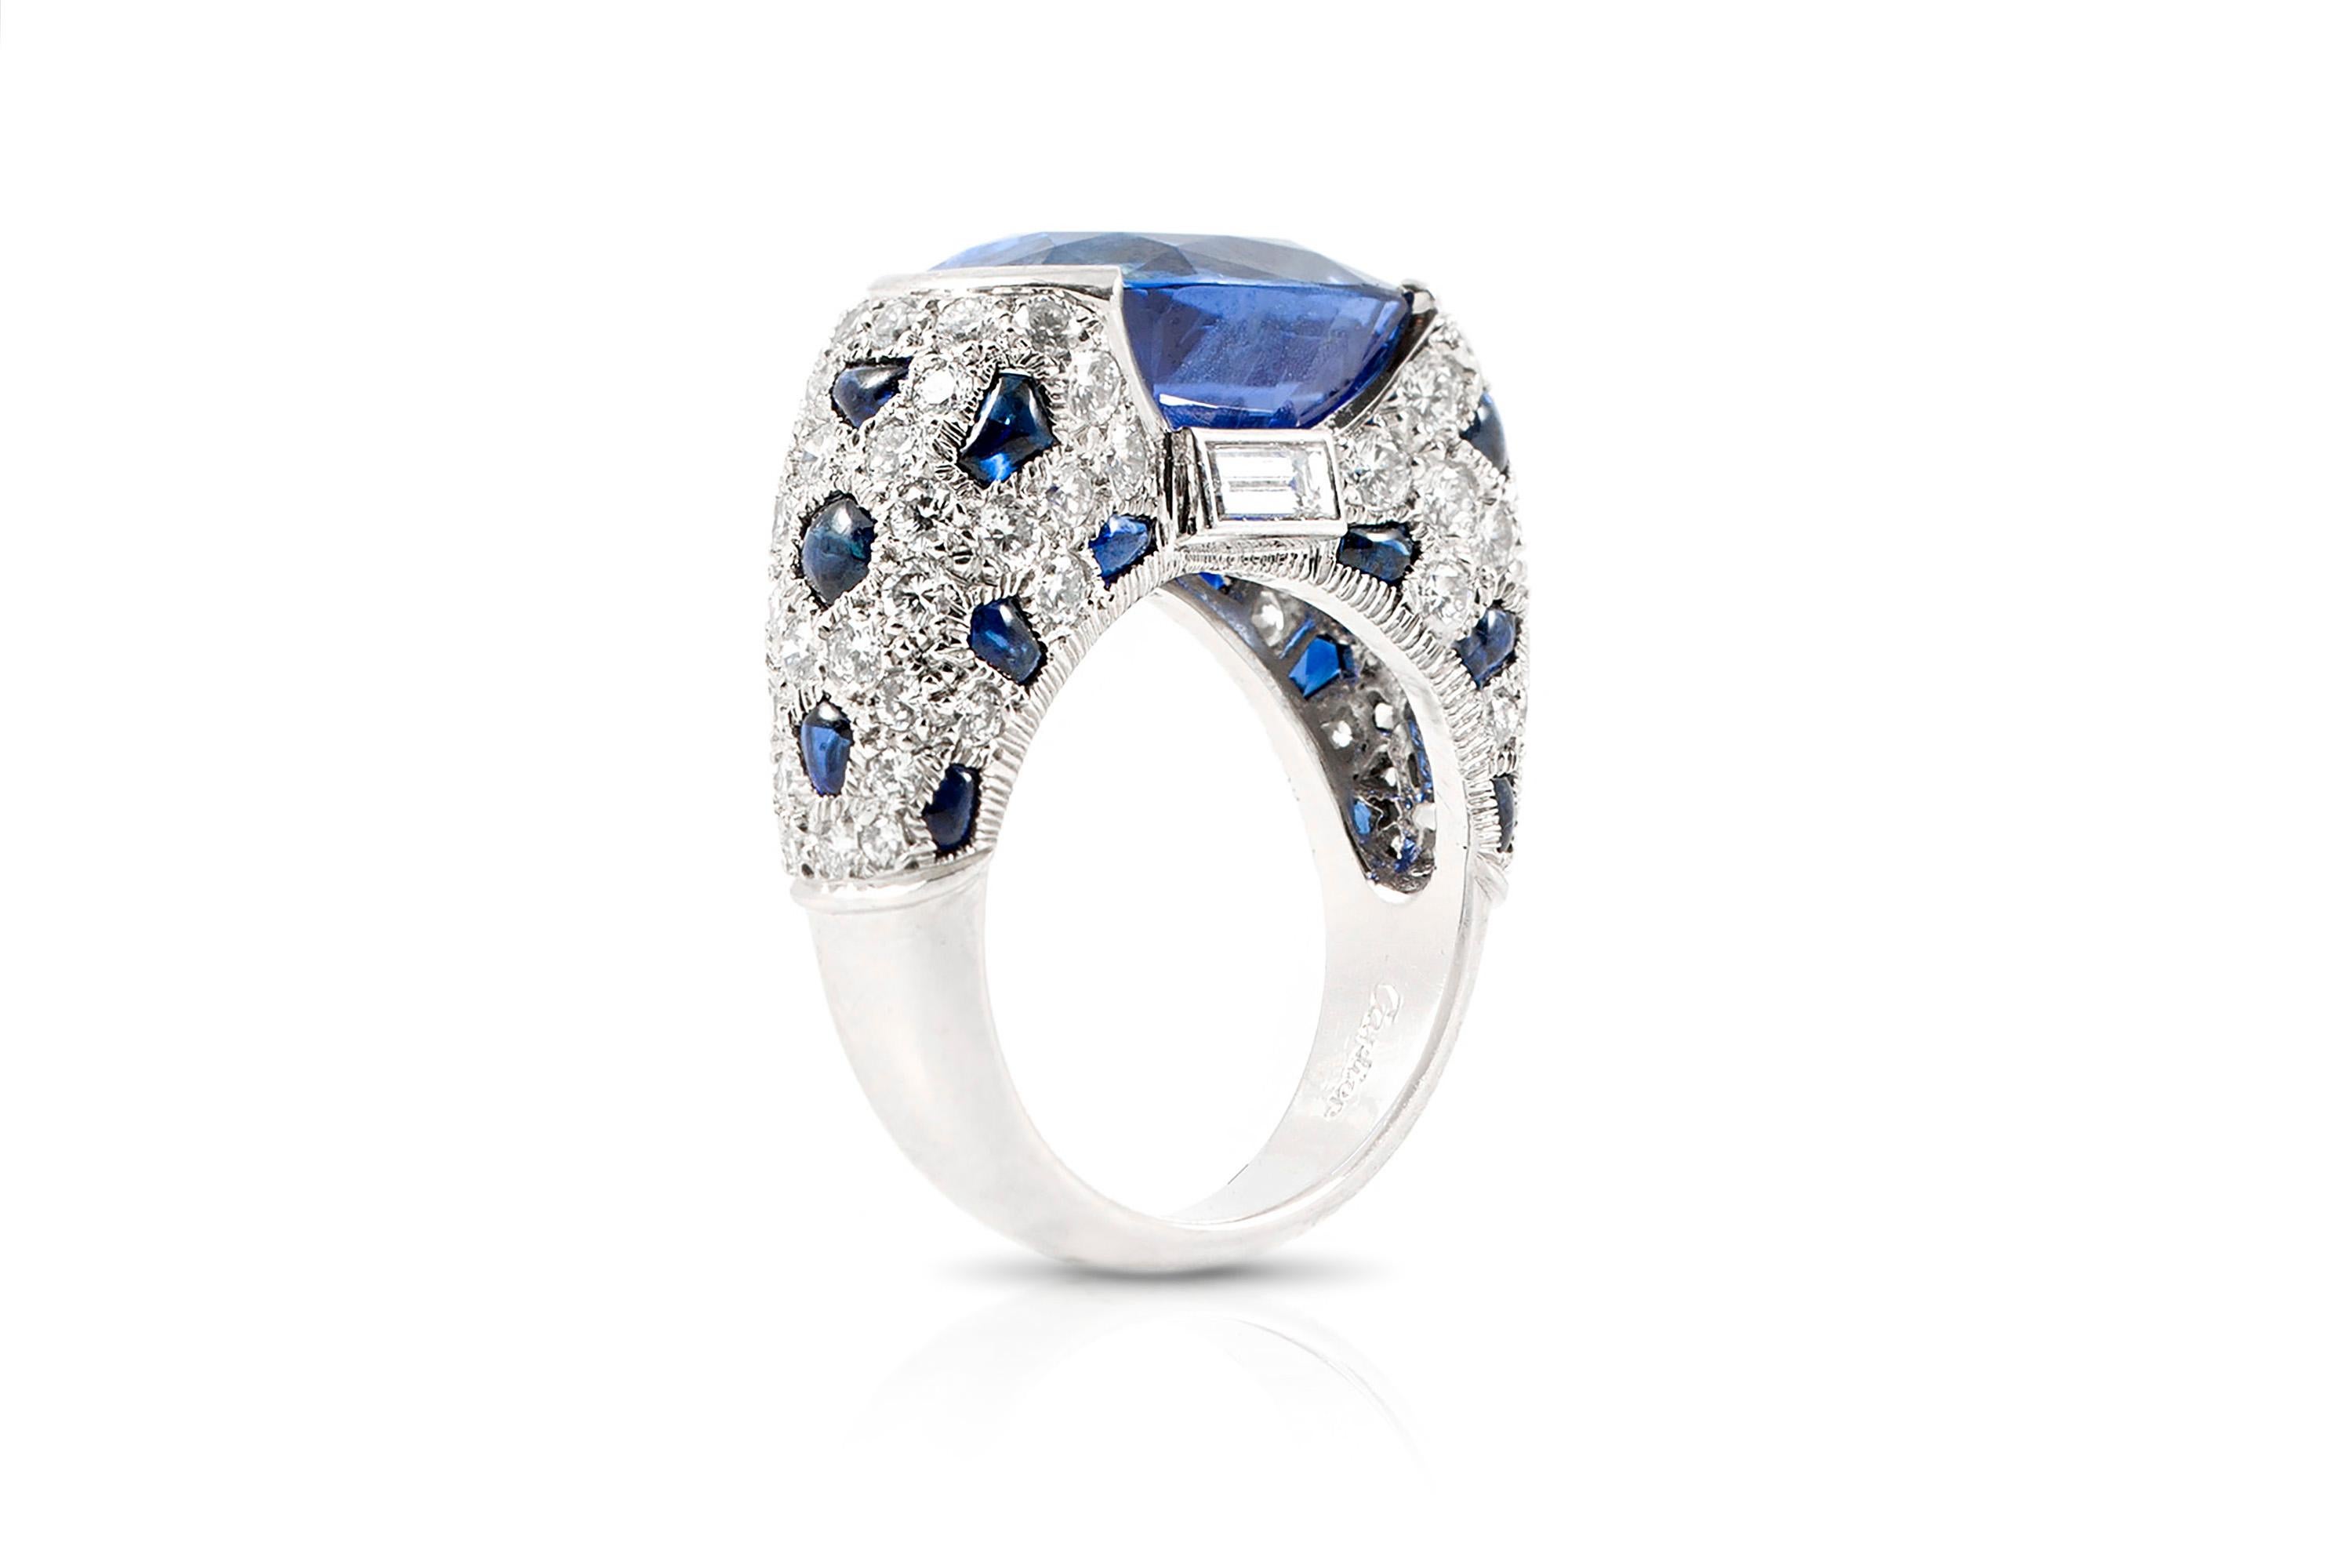 Cartier ring finely crafted in platinum, weighing approximately 13.00 carats of blue sapphires.
A very unique and rare cocktail ring to have.
Signed by Cartier.